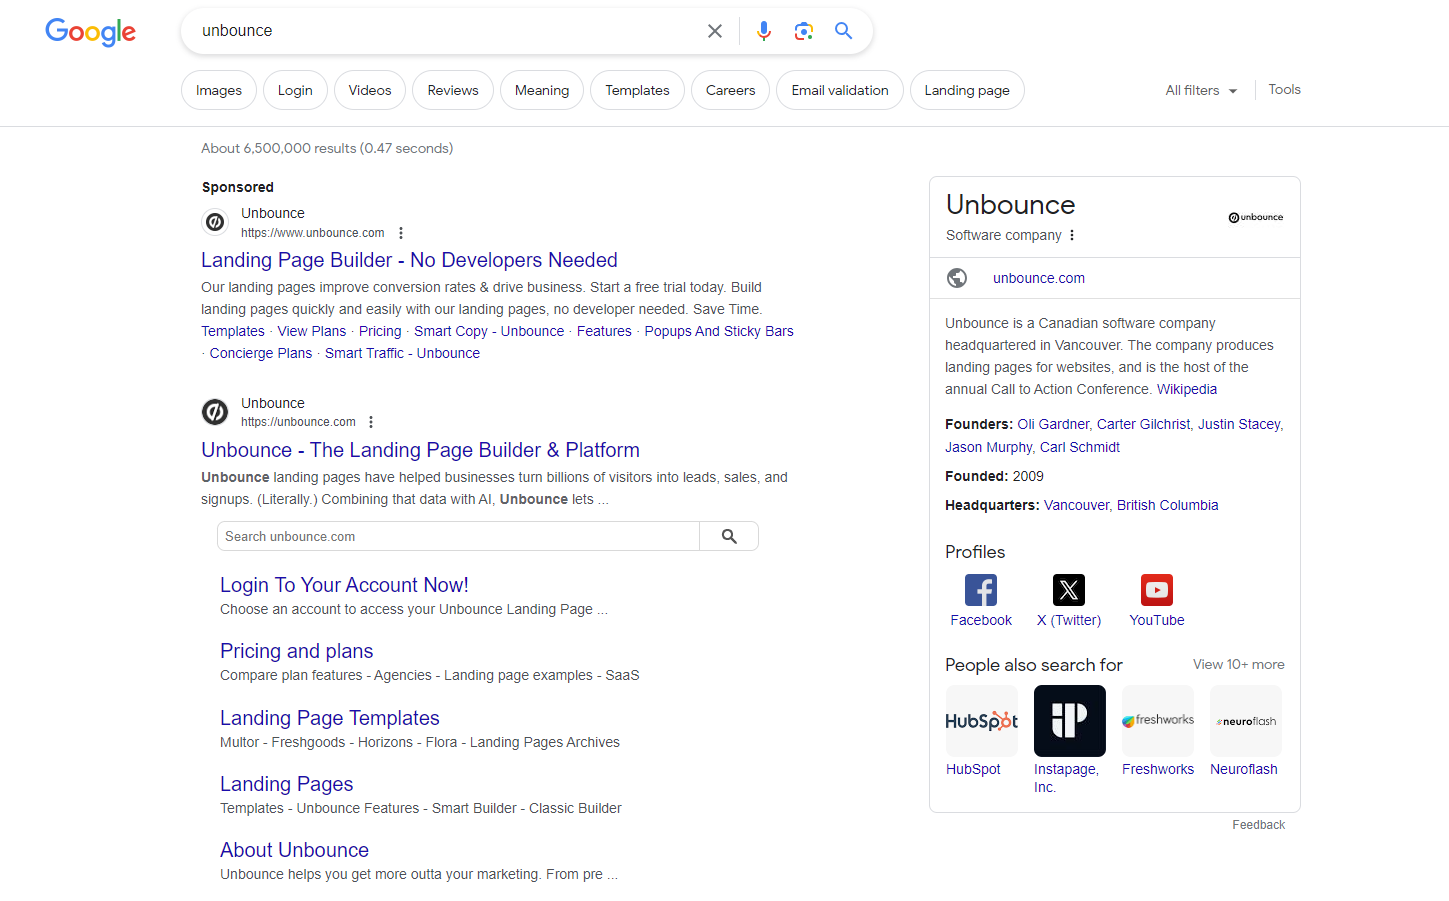 search results for the software company "Unbounce"